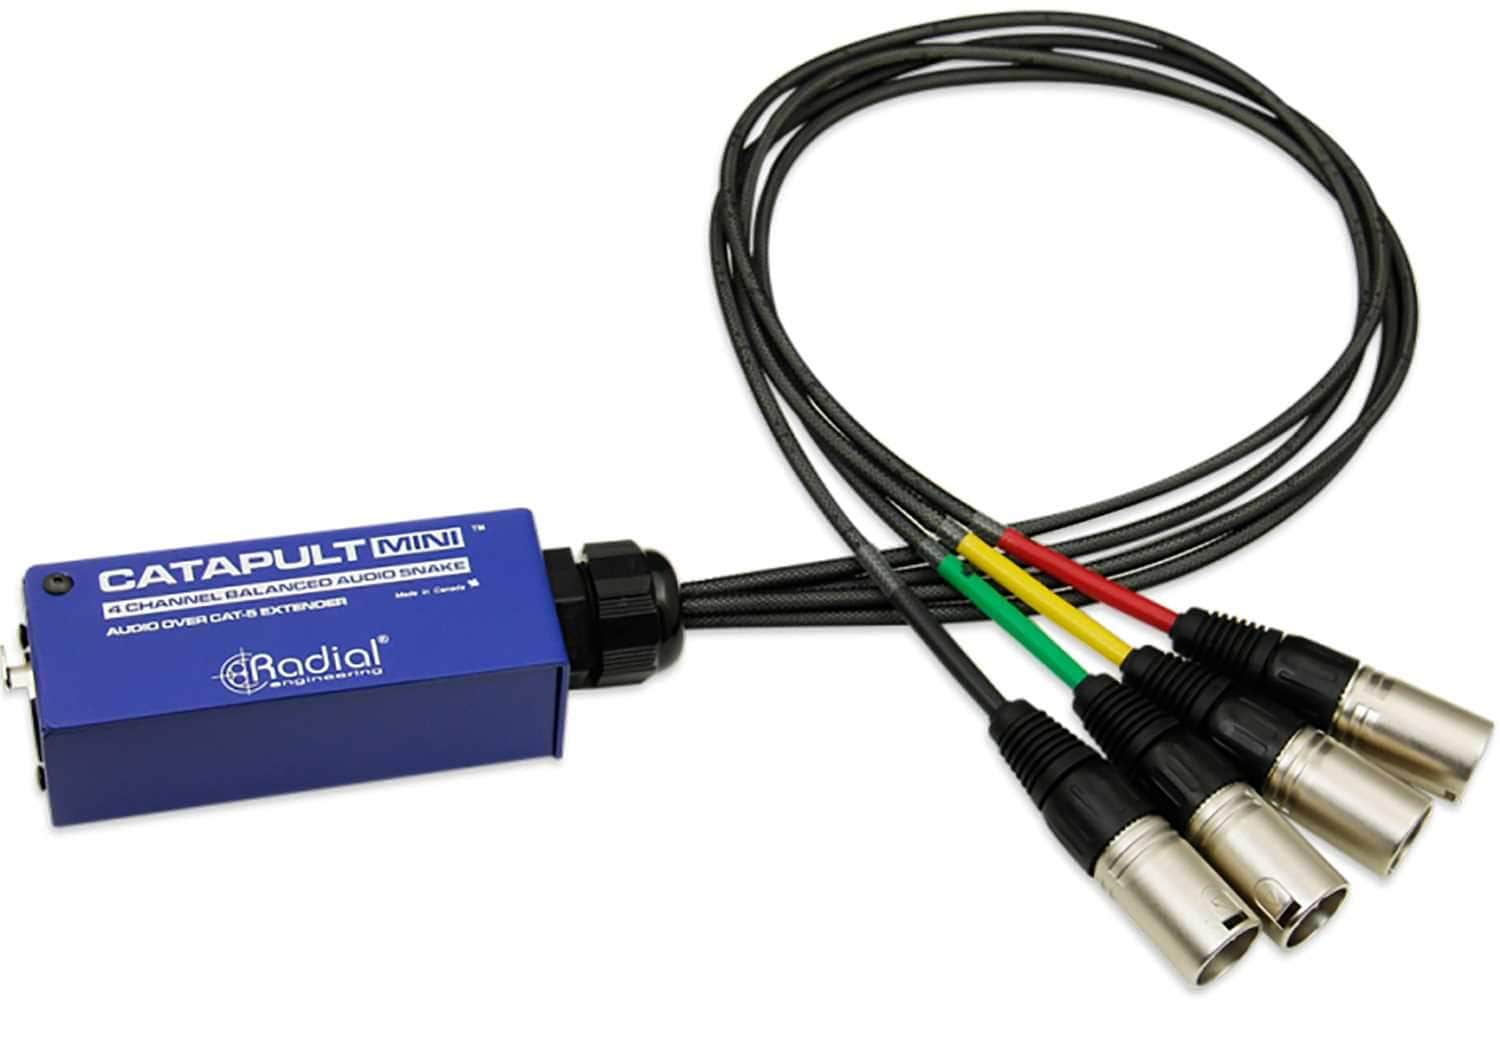 Radial Catapult MINI RX 4ch Cat5 XLRM Breakout Box - ProSound and Stage Lighting